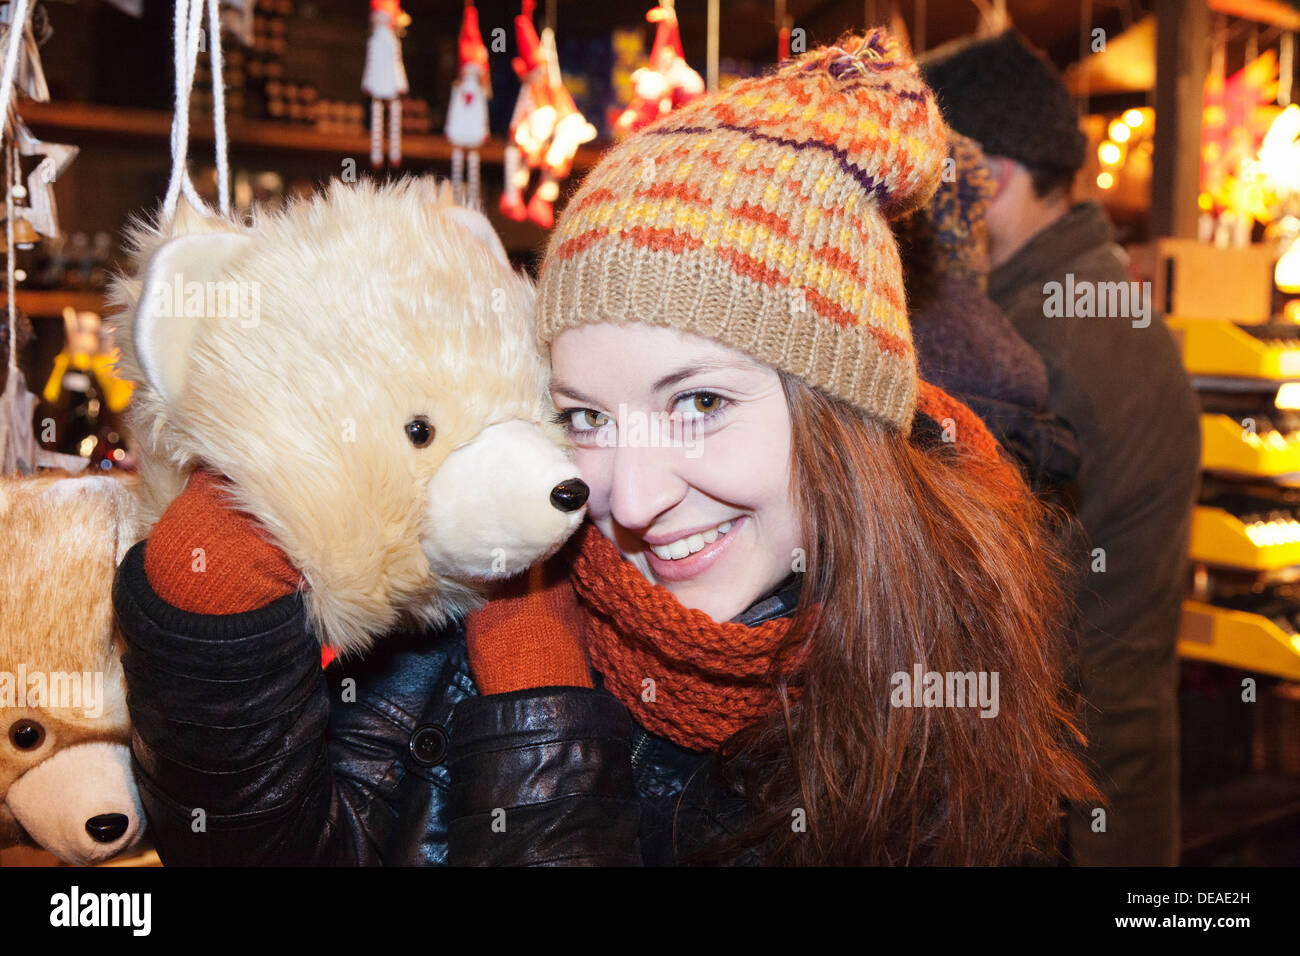 Young woman snuggle with a toy bear at the Christmas fair, Esslingen, Baden Wurttemberg, Germany Stock Photo